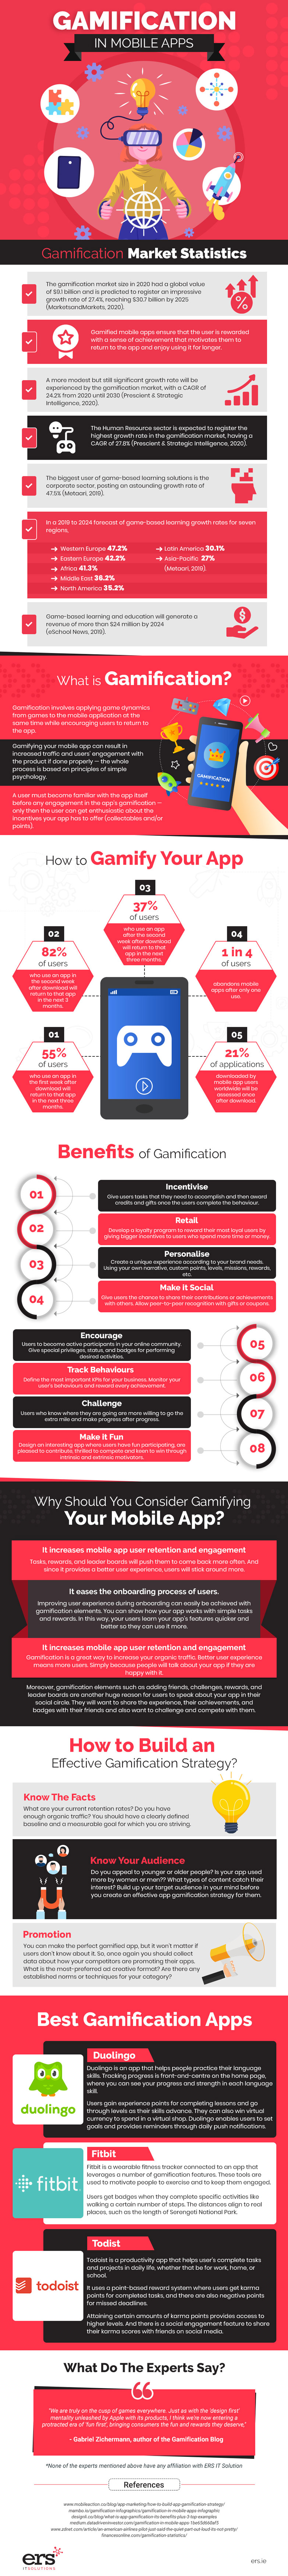 Gamification in Mobile Apps